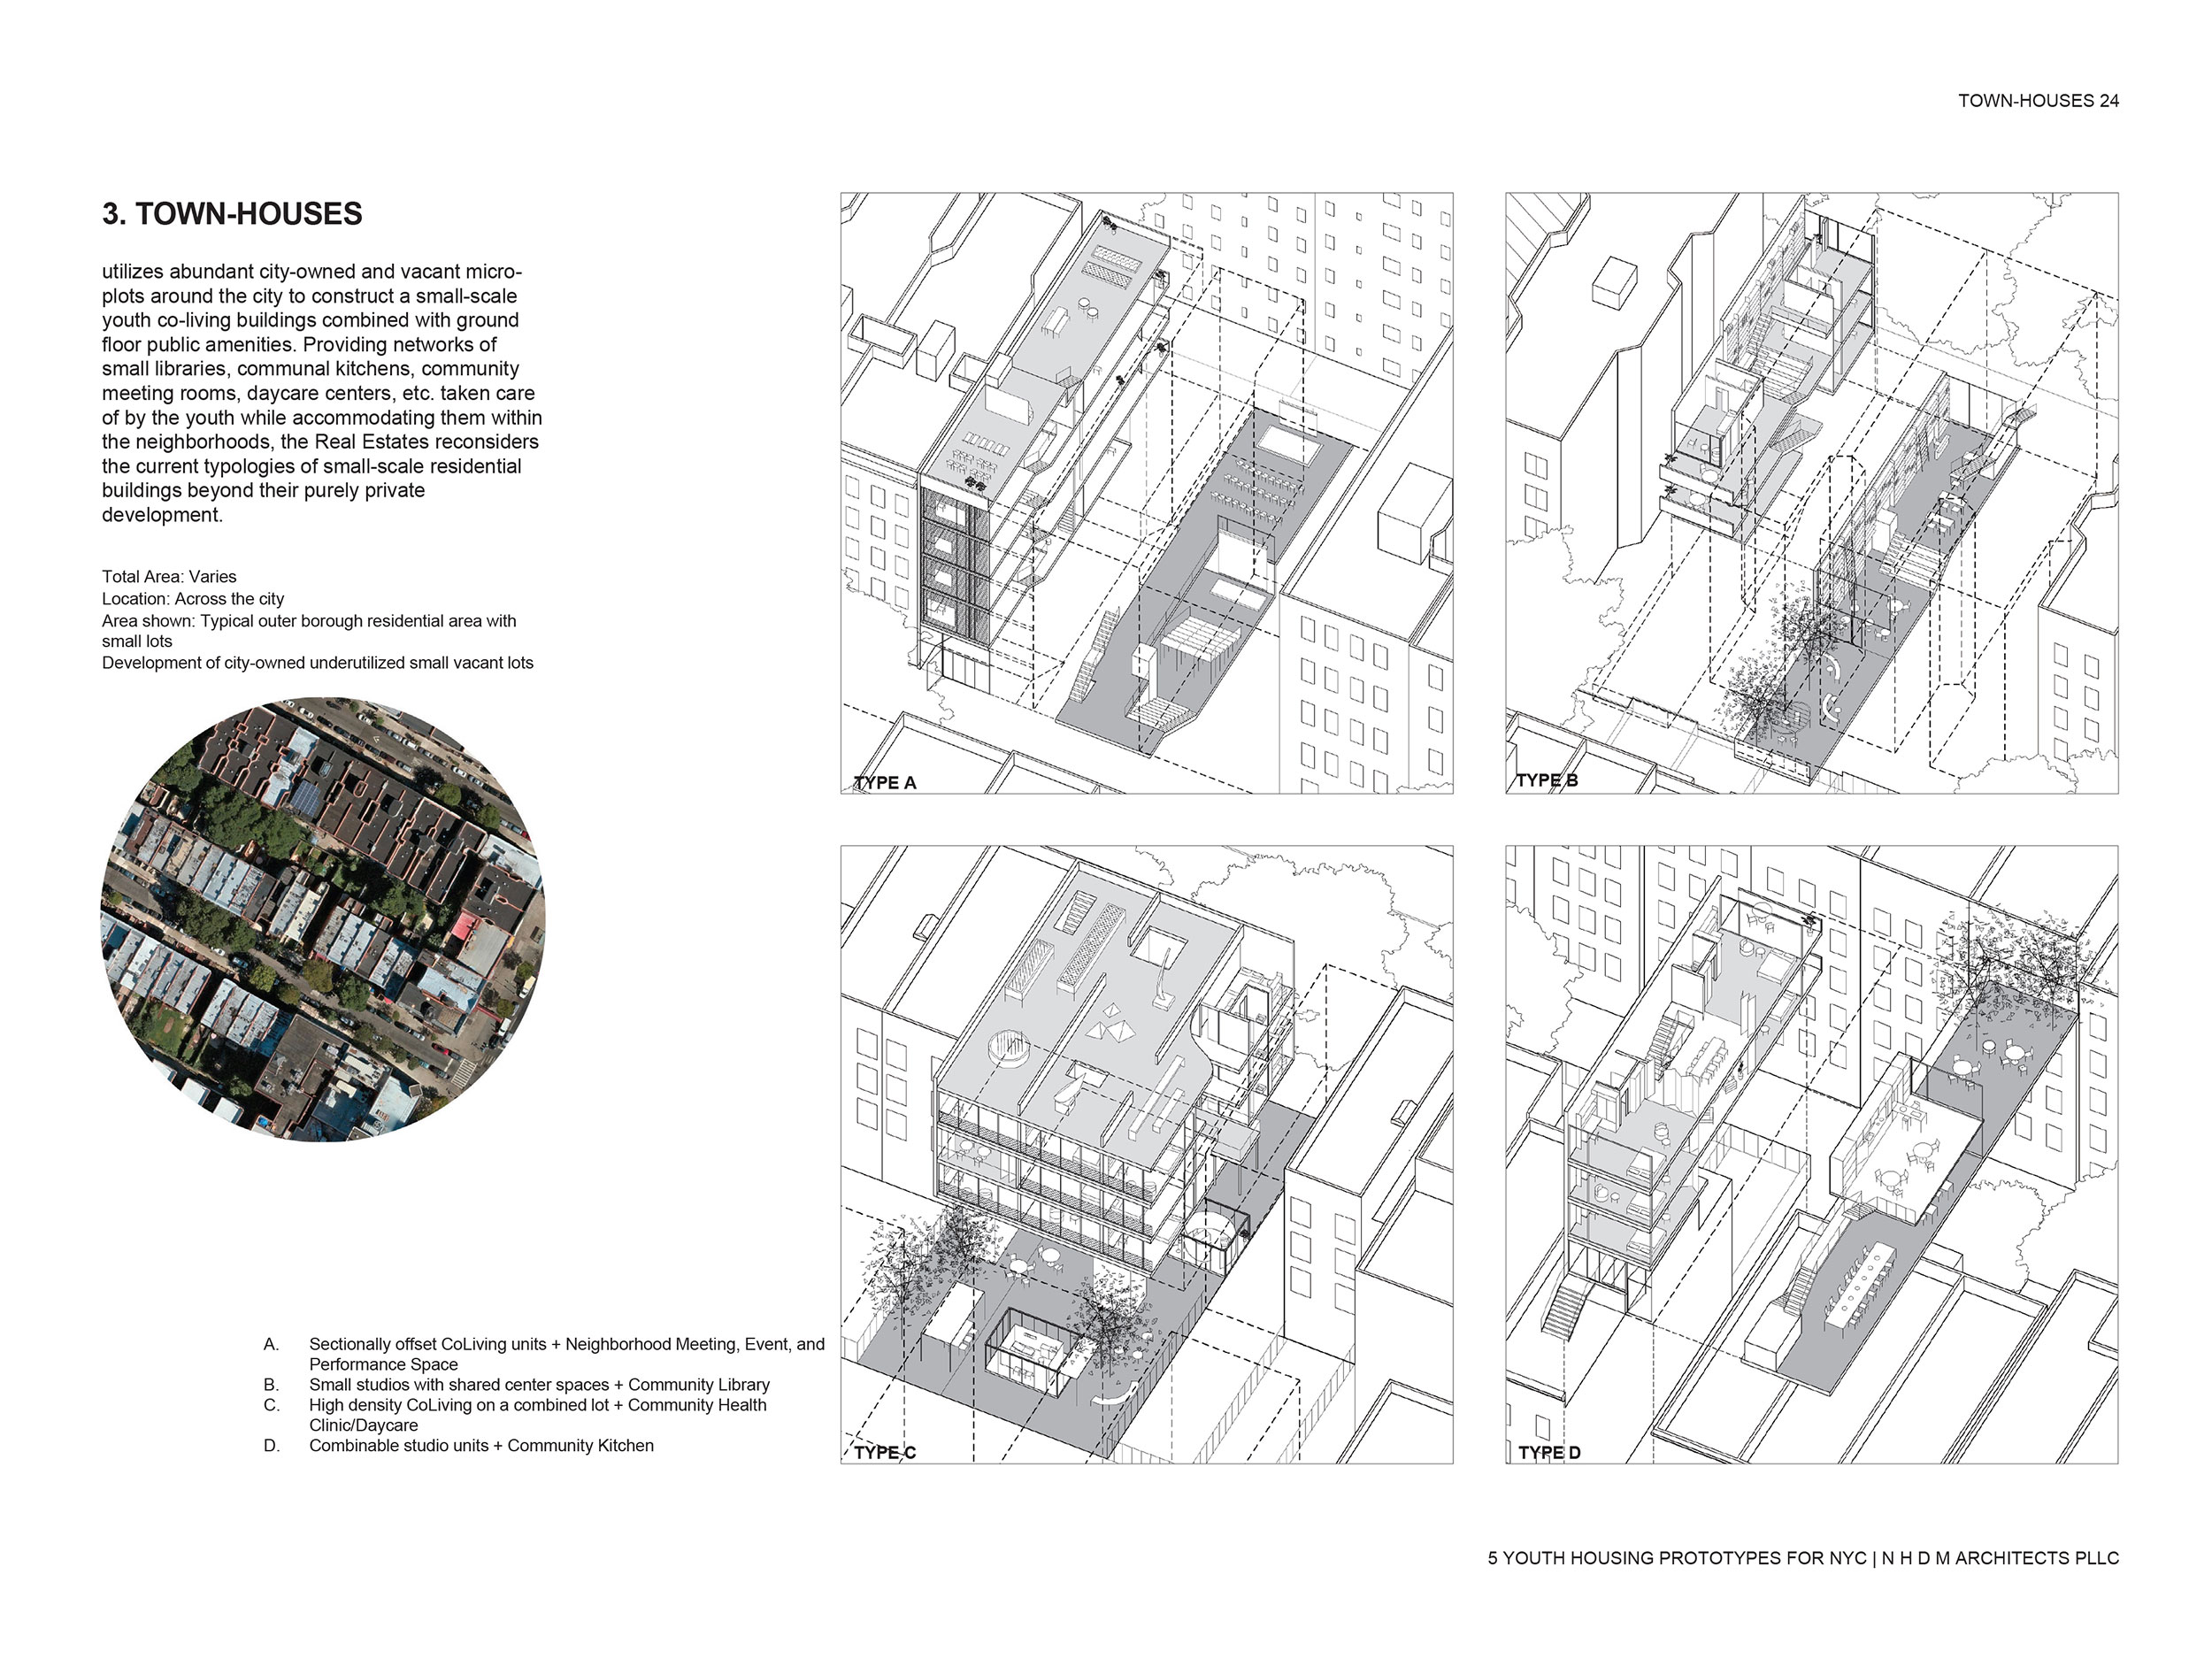 5 Youth Housing Prototypes for NYC illustration 4